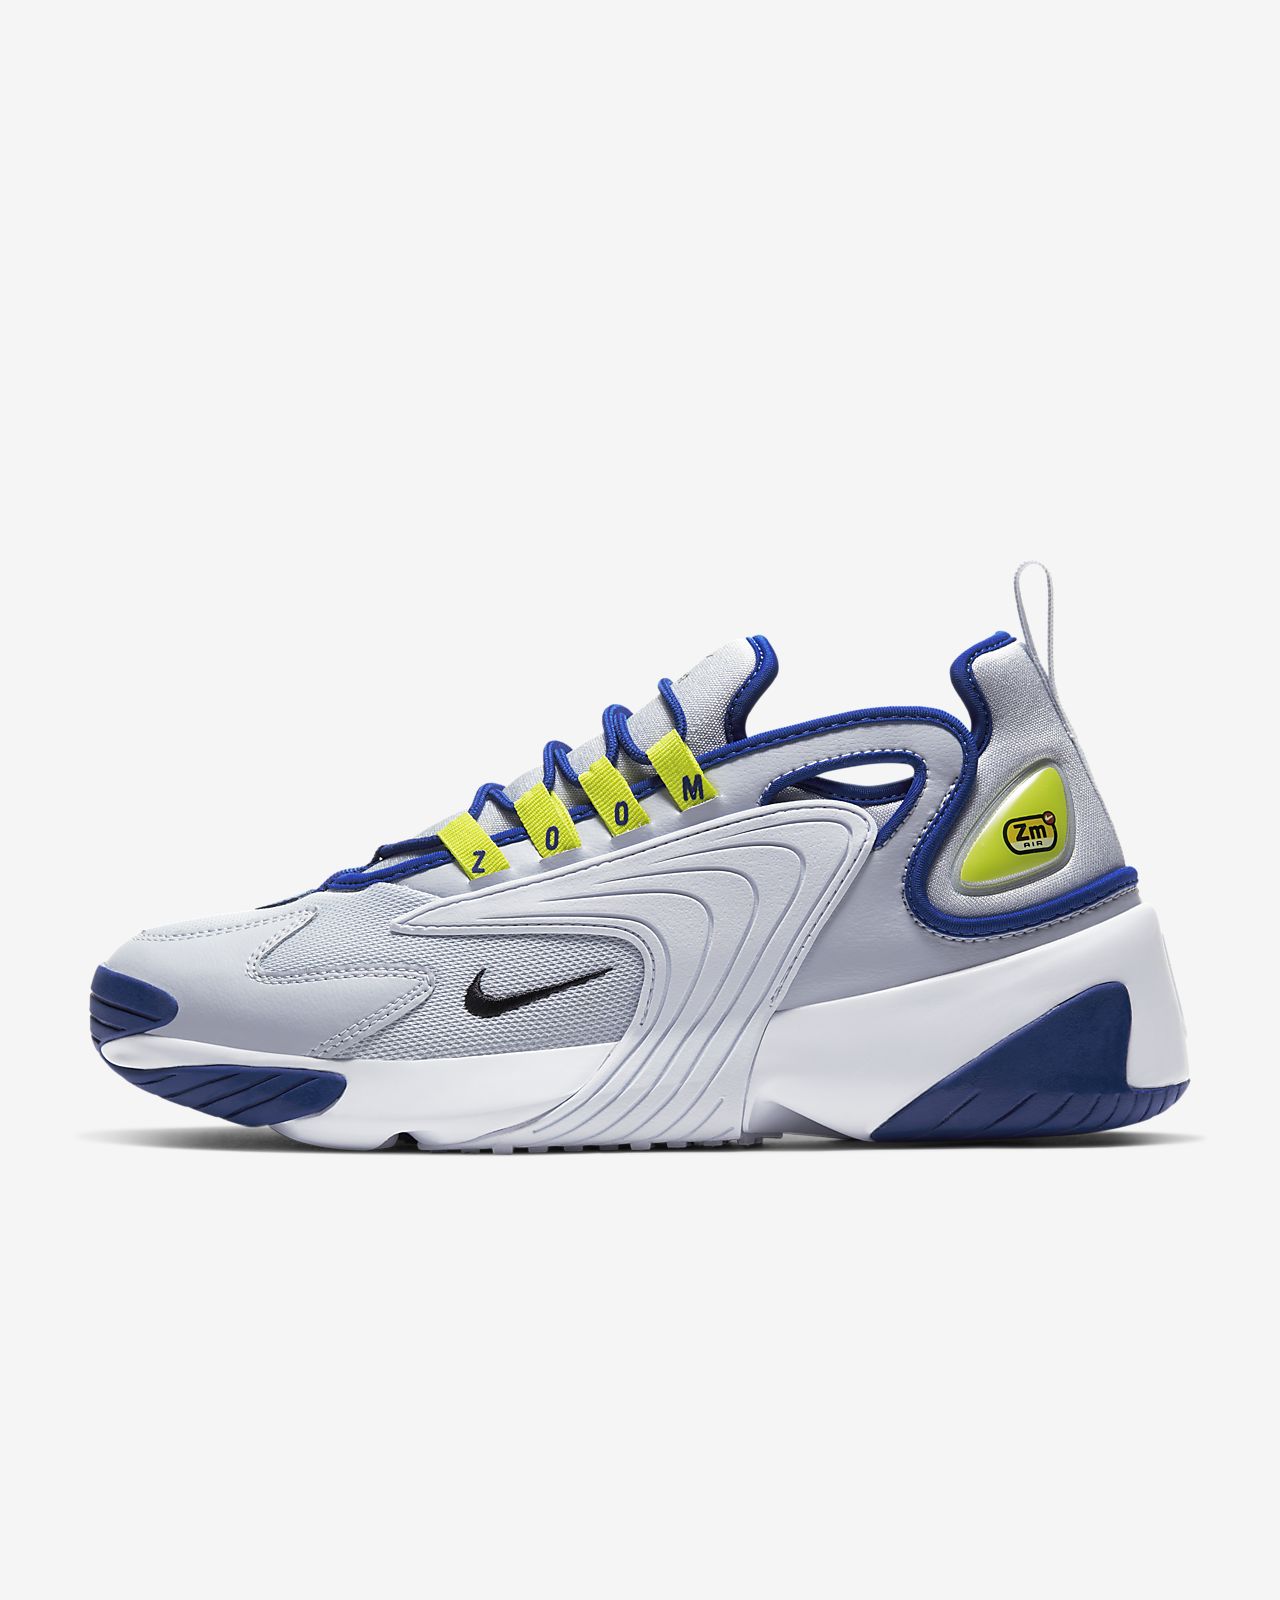 nike tn zoom Shop Clothing & Shoes Online